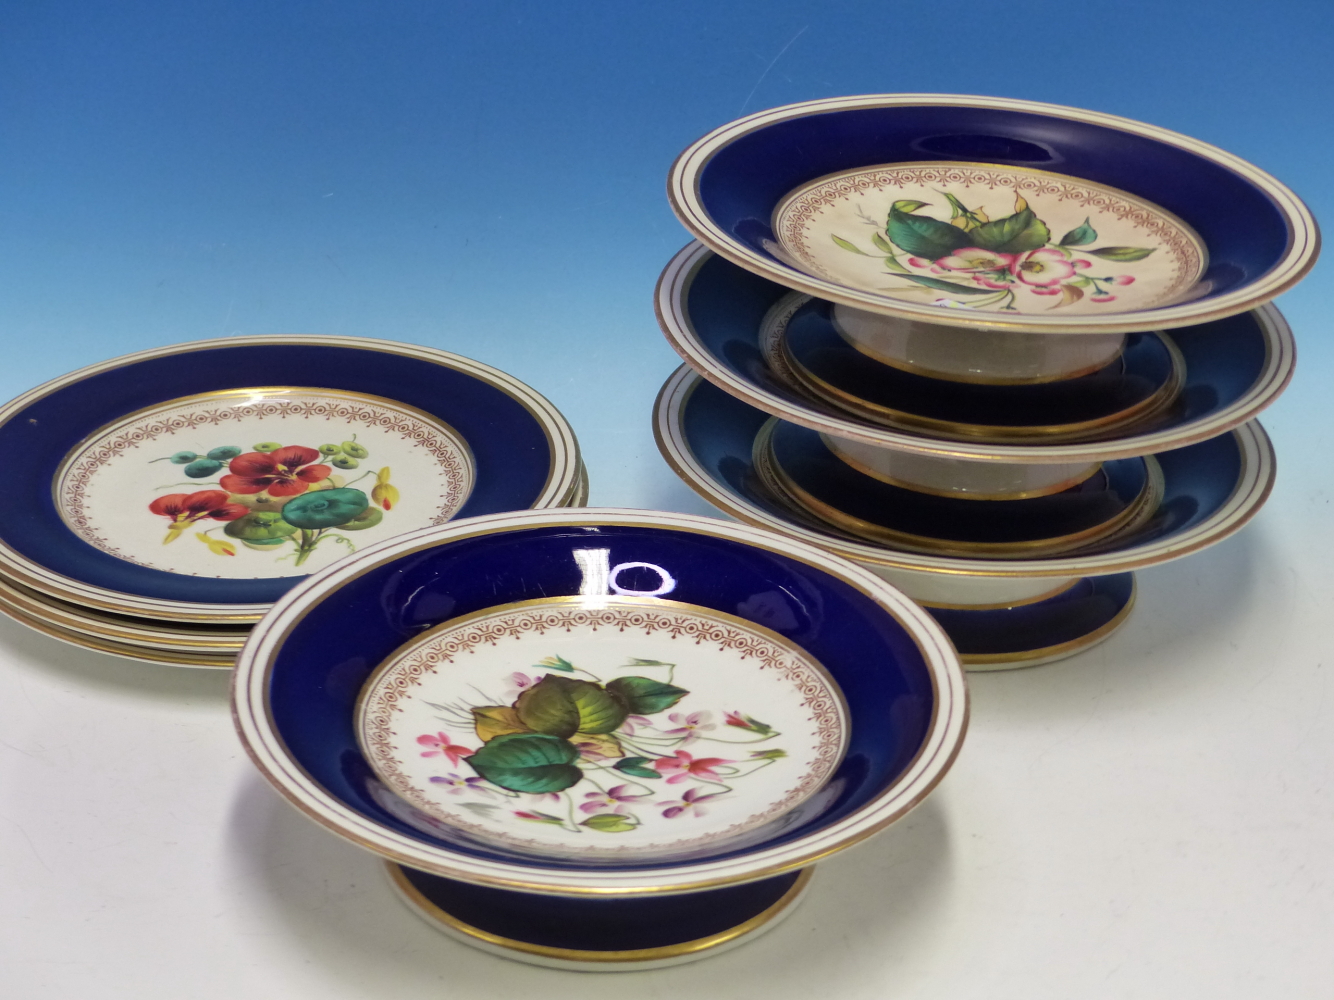 A LATE 19th C. ENGLISH PORCELAIN DESSERT SERVICE, EACH PIECE PRINTED AND PAINTED WITH FLOWERS WITHIN